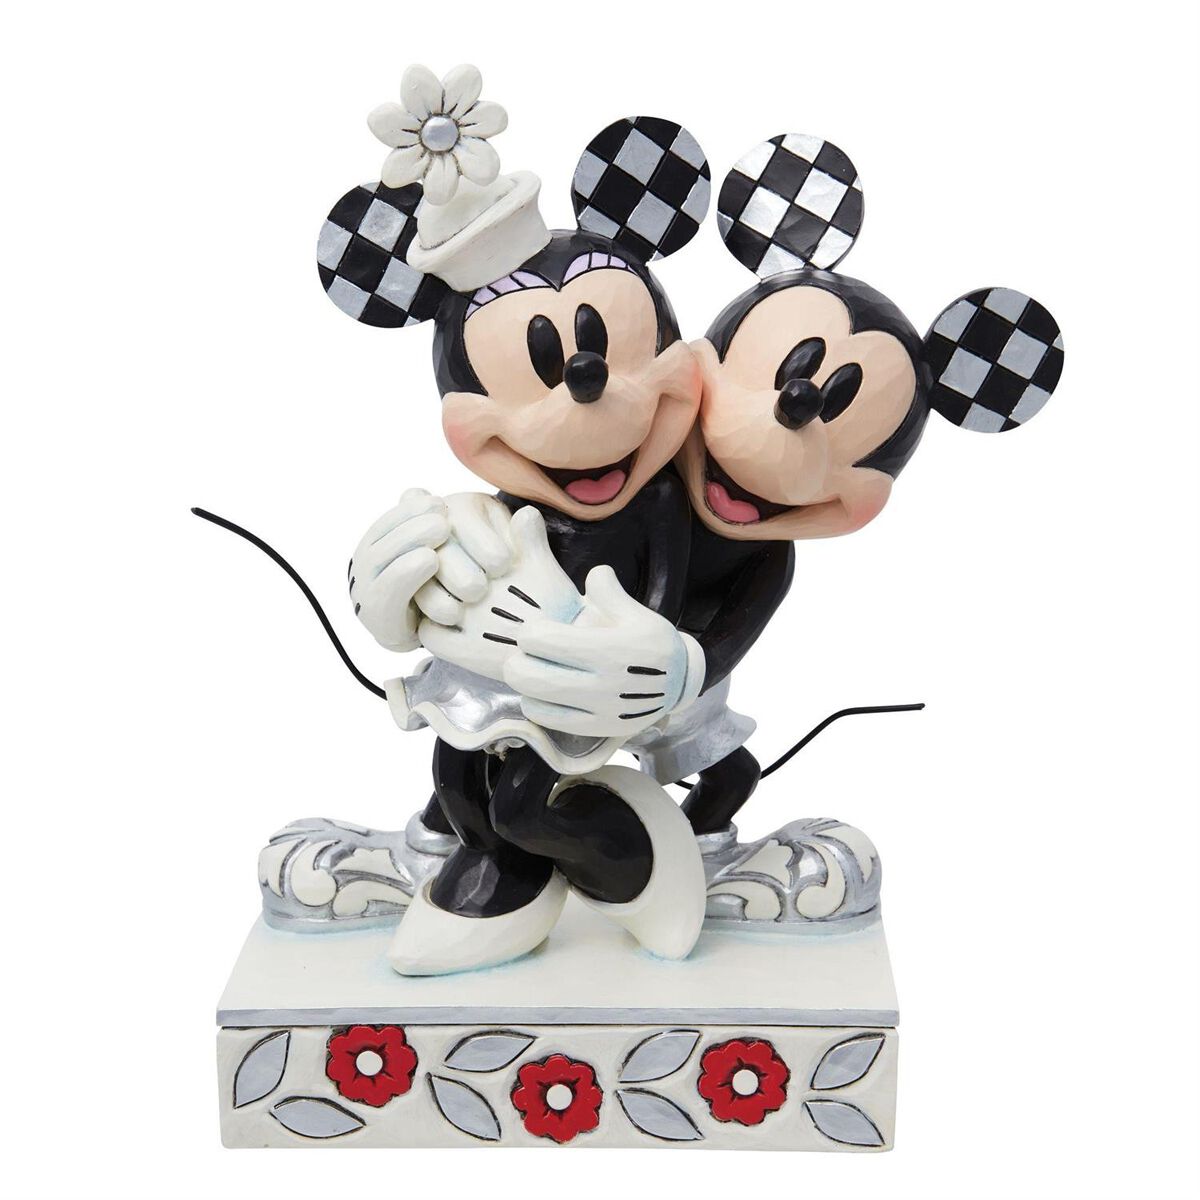 Mickey Mouse Centennial Celebration - Micky & Minnie - Christmas Countdown Statue multicolor